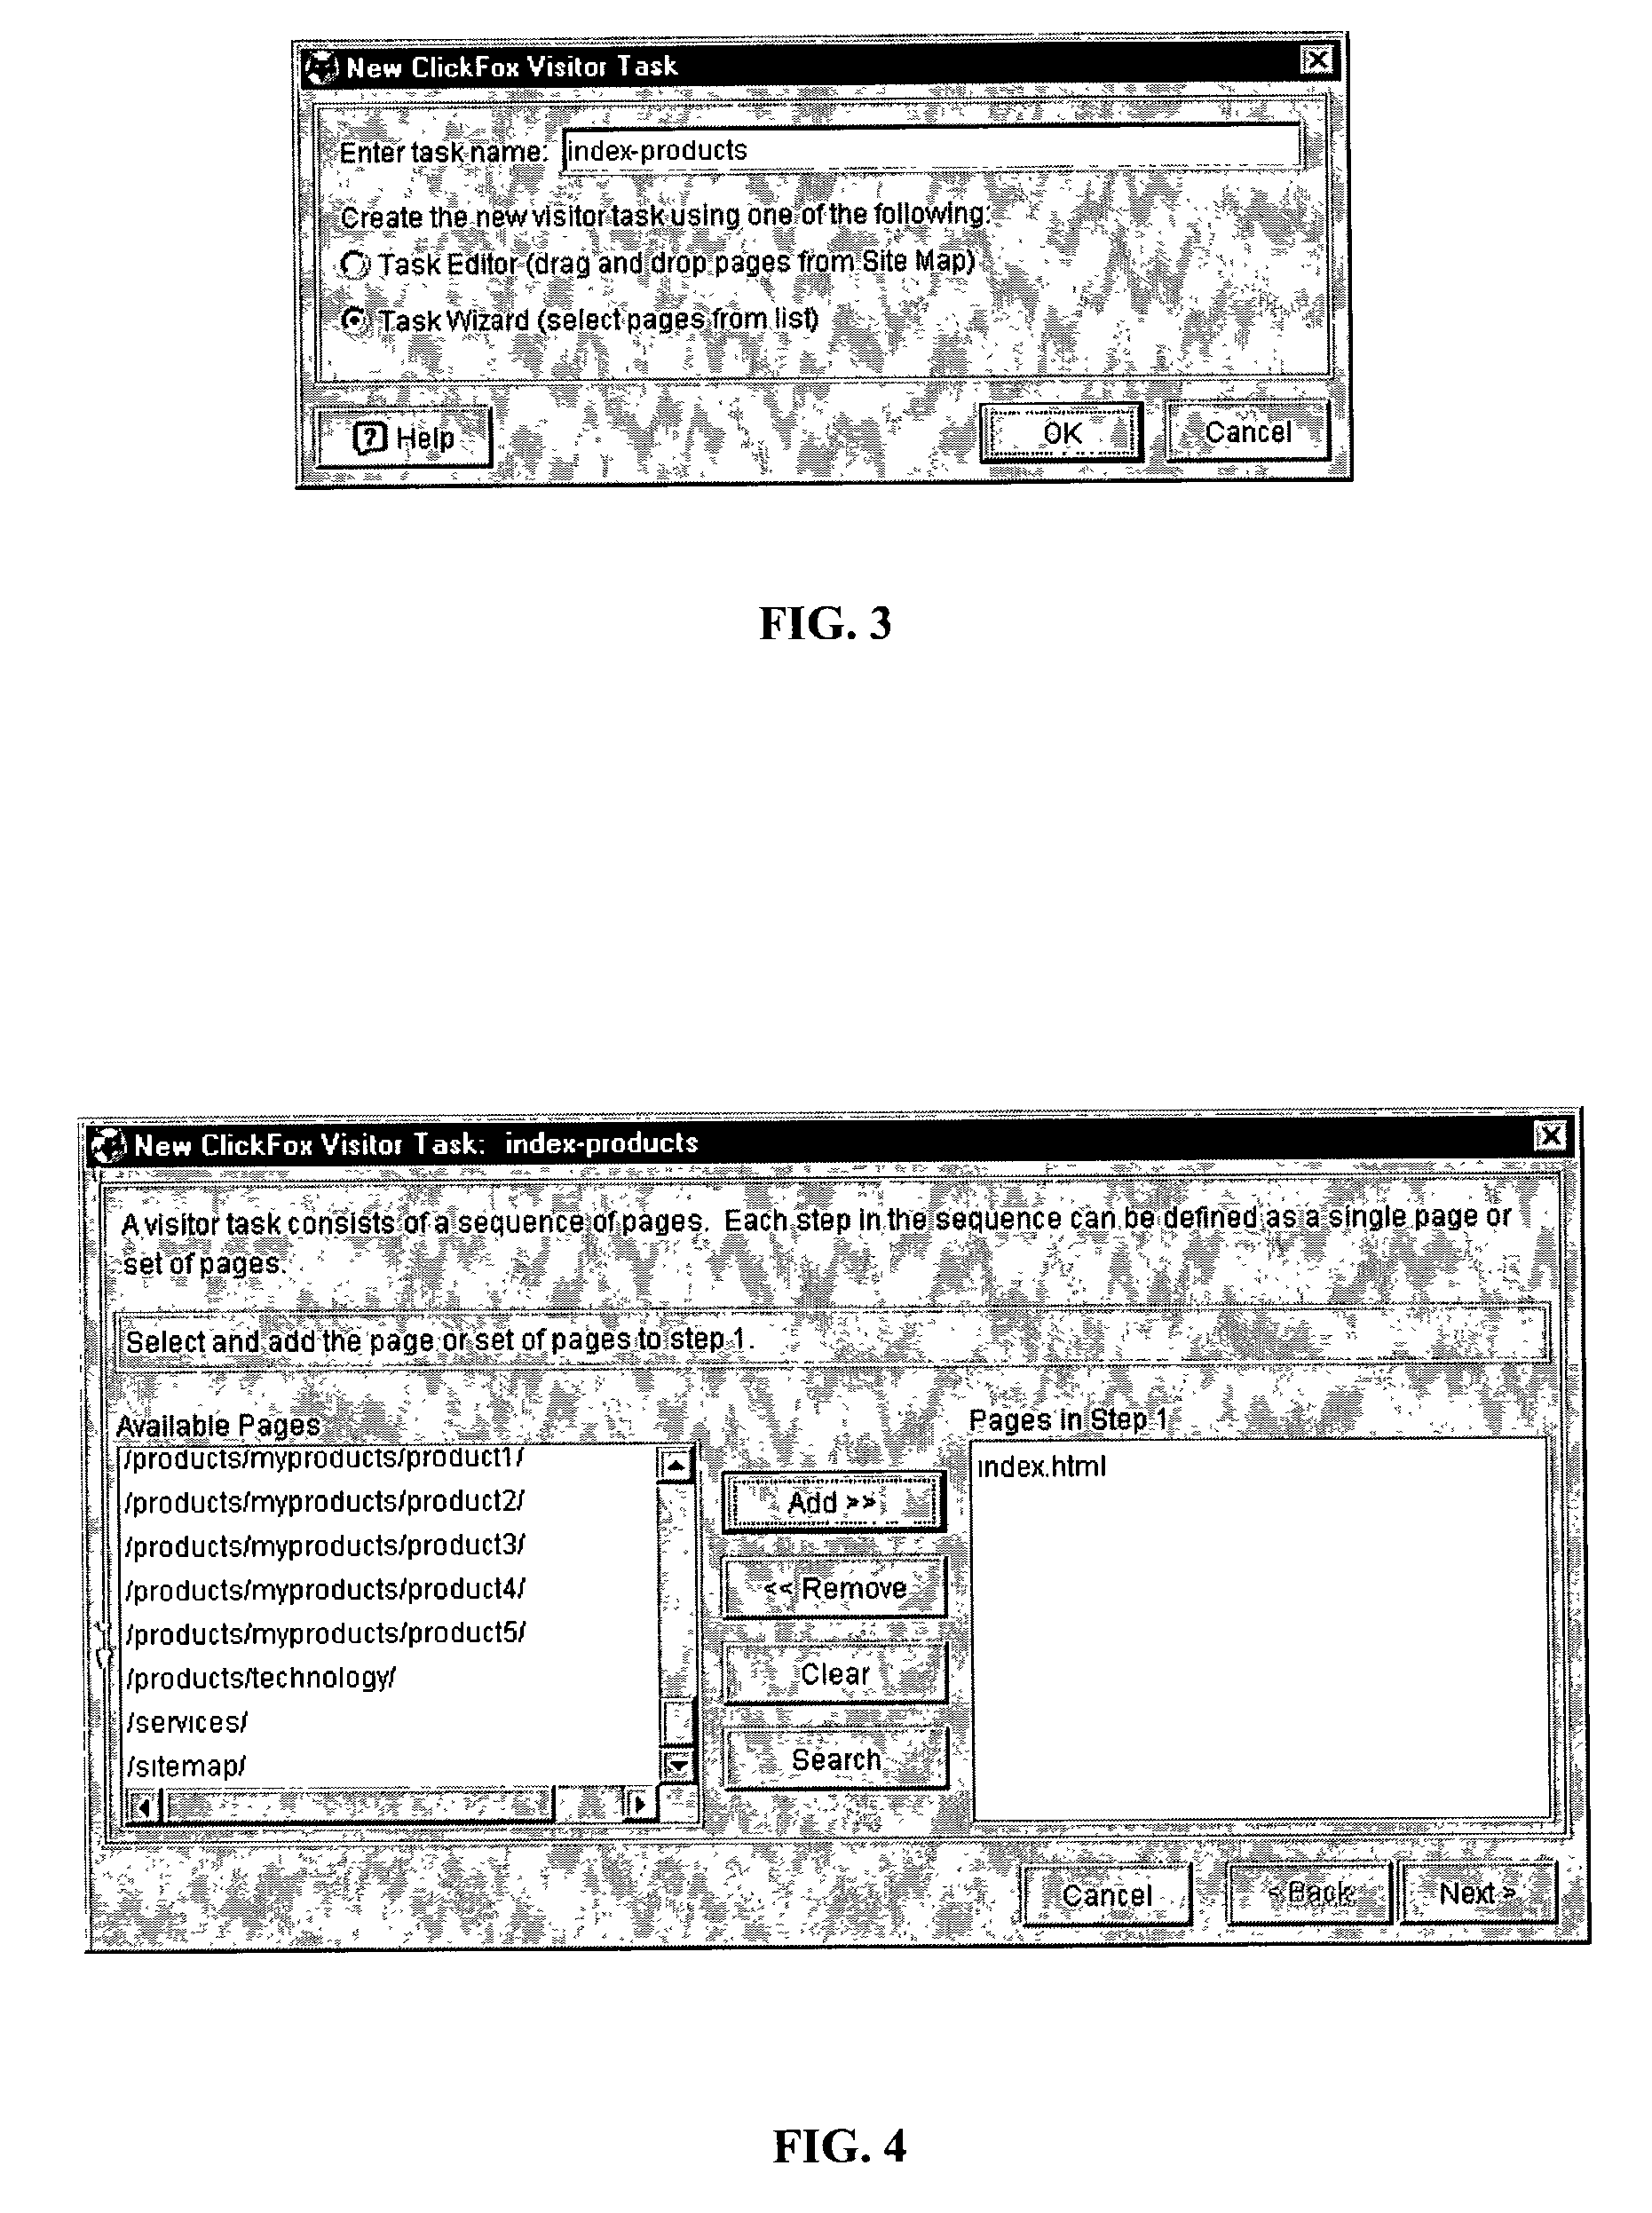 System and method for analyzing system visitor activities